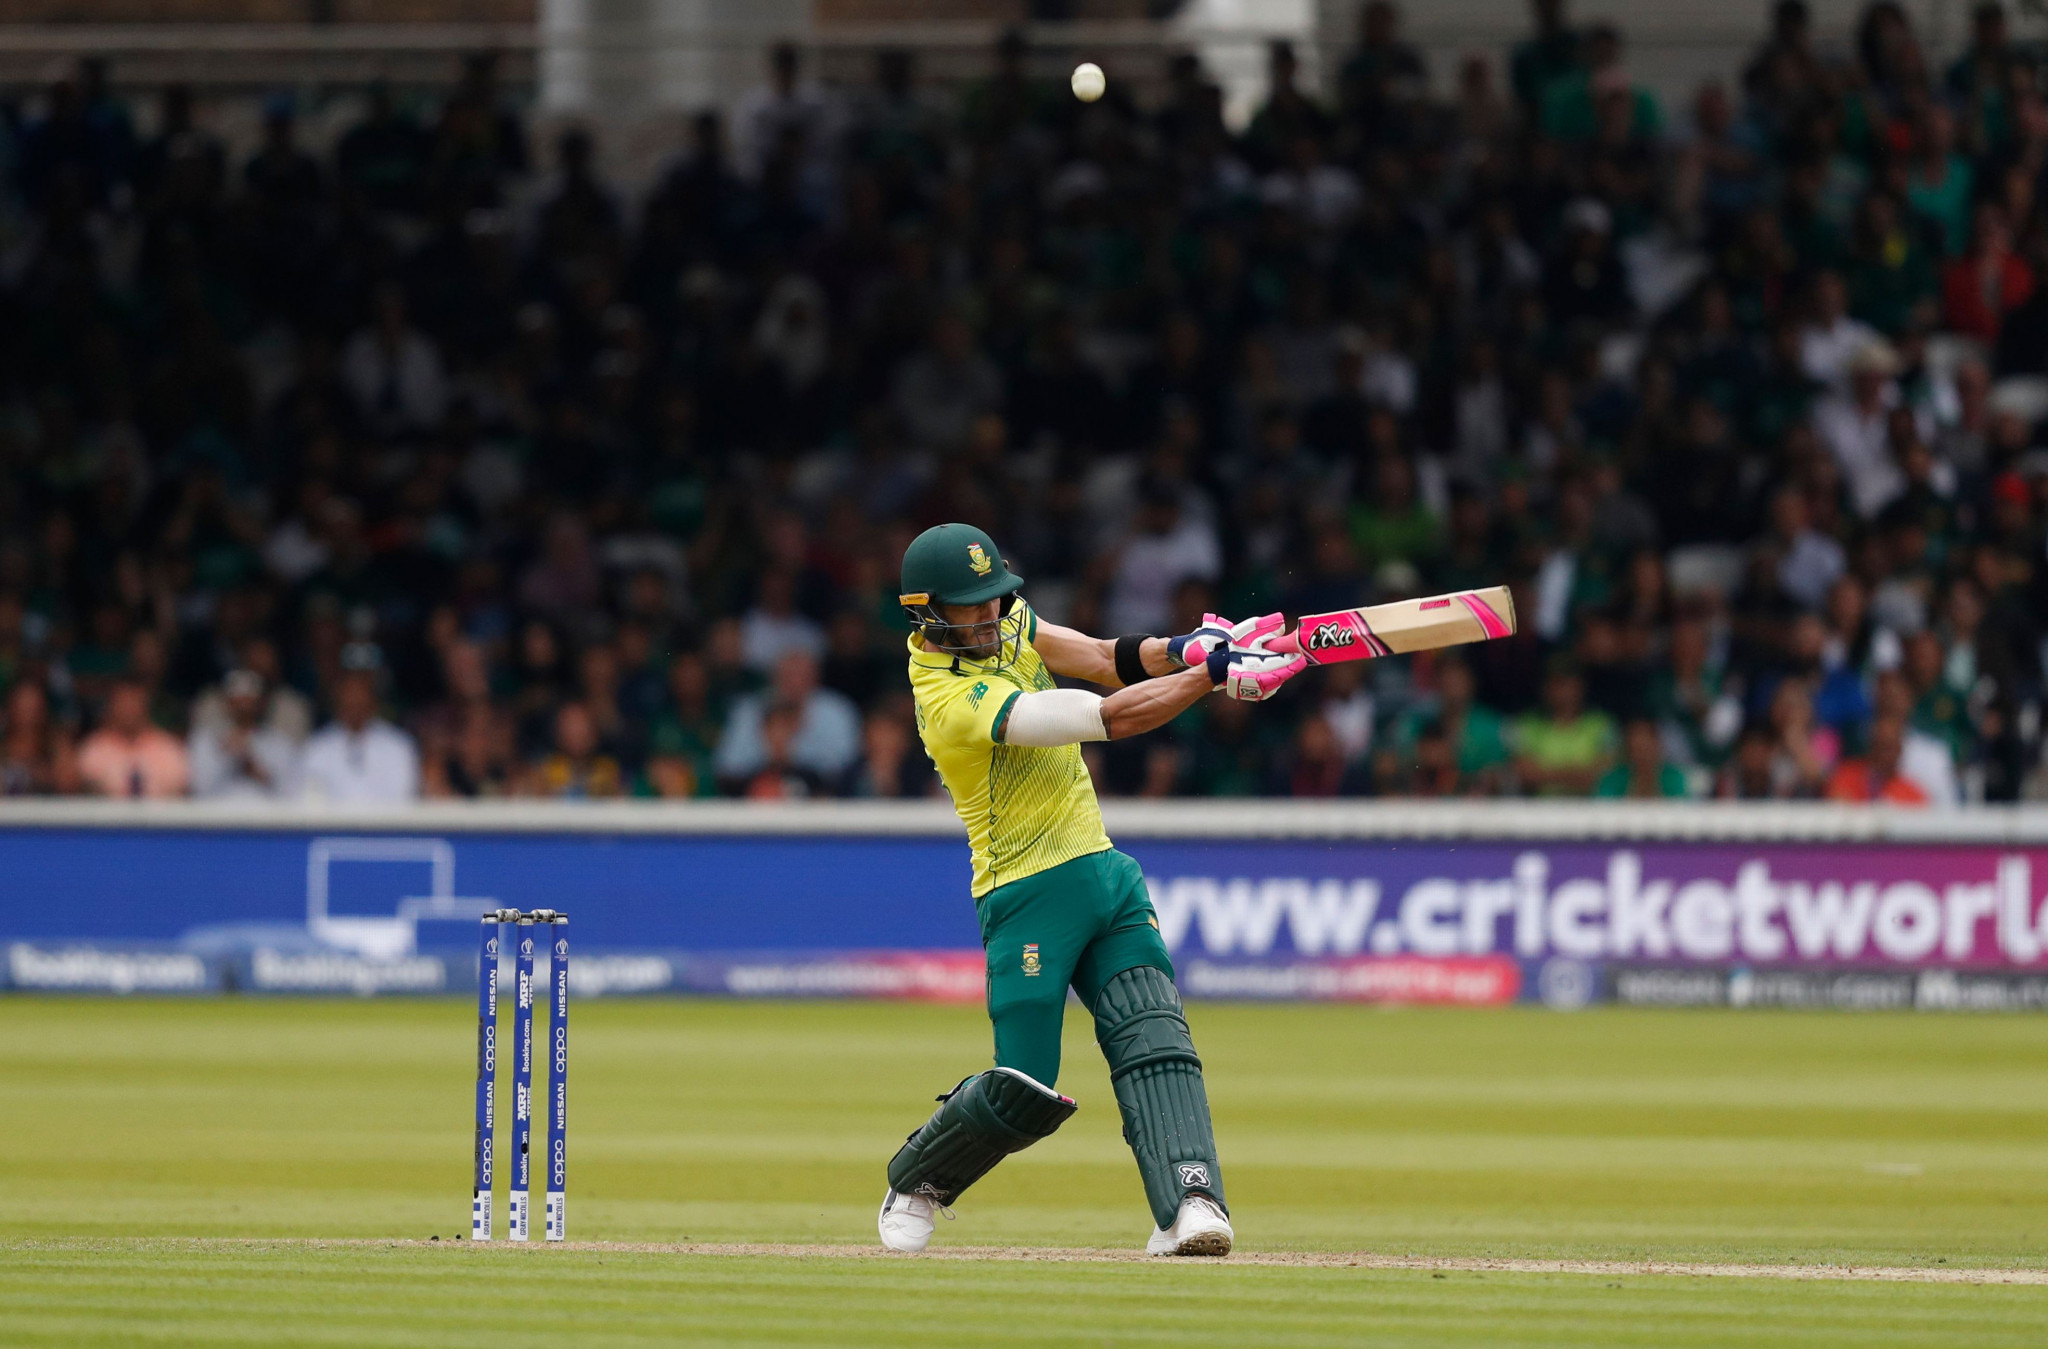 Faf du Plessis top scored for South Africa but the captain could not prevent their defeat ©Getty Images